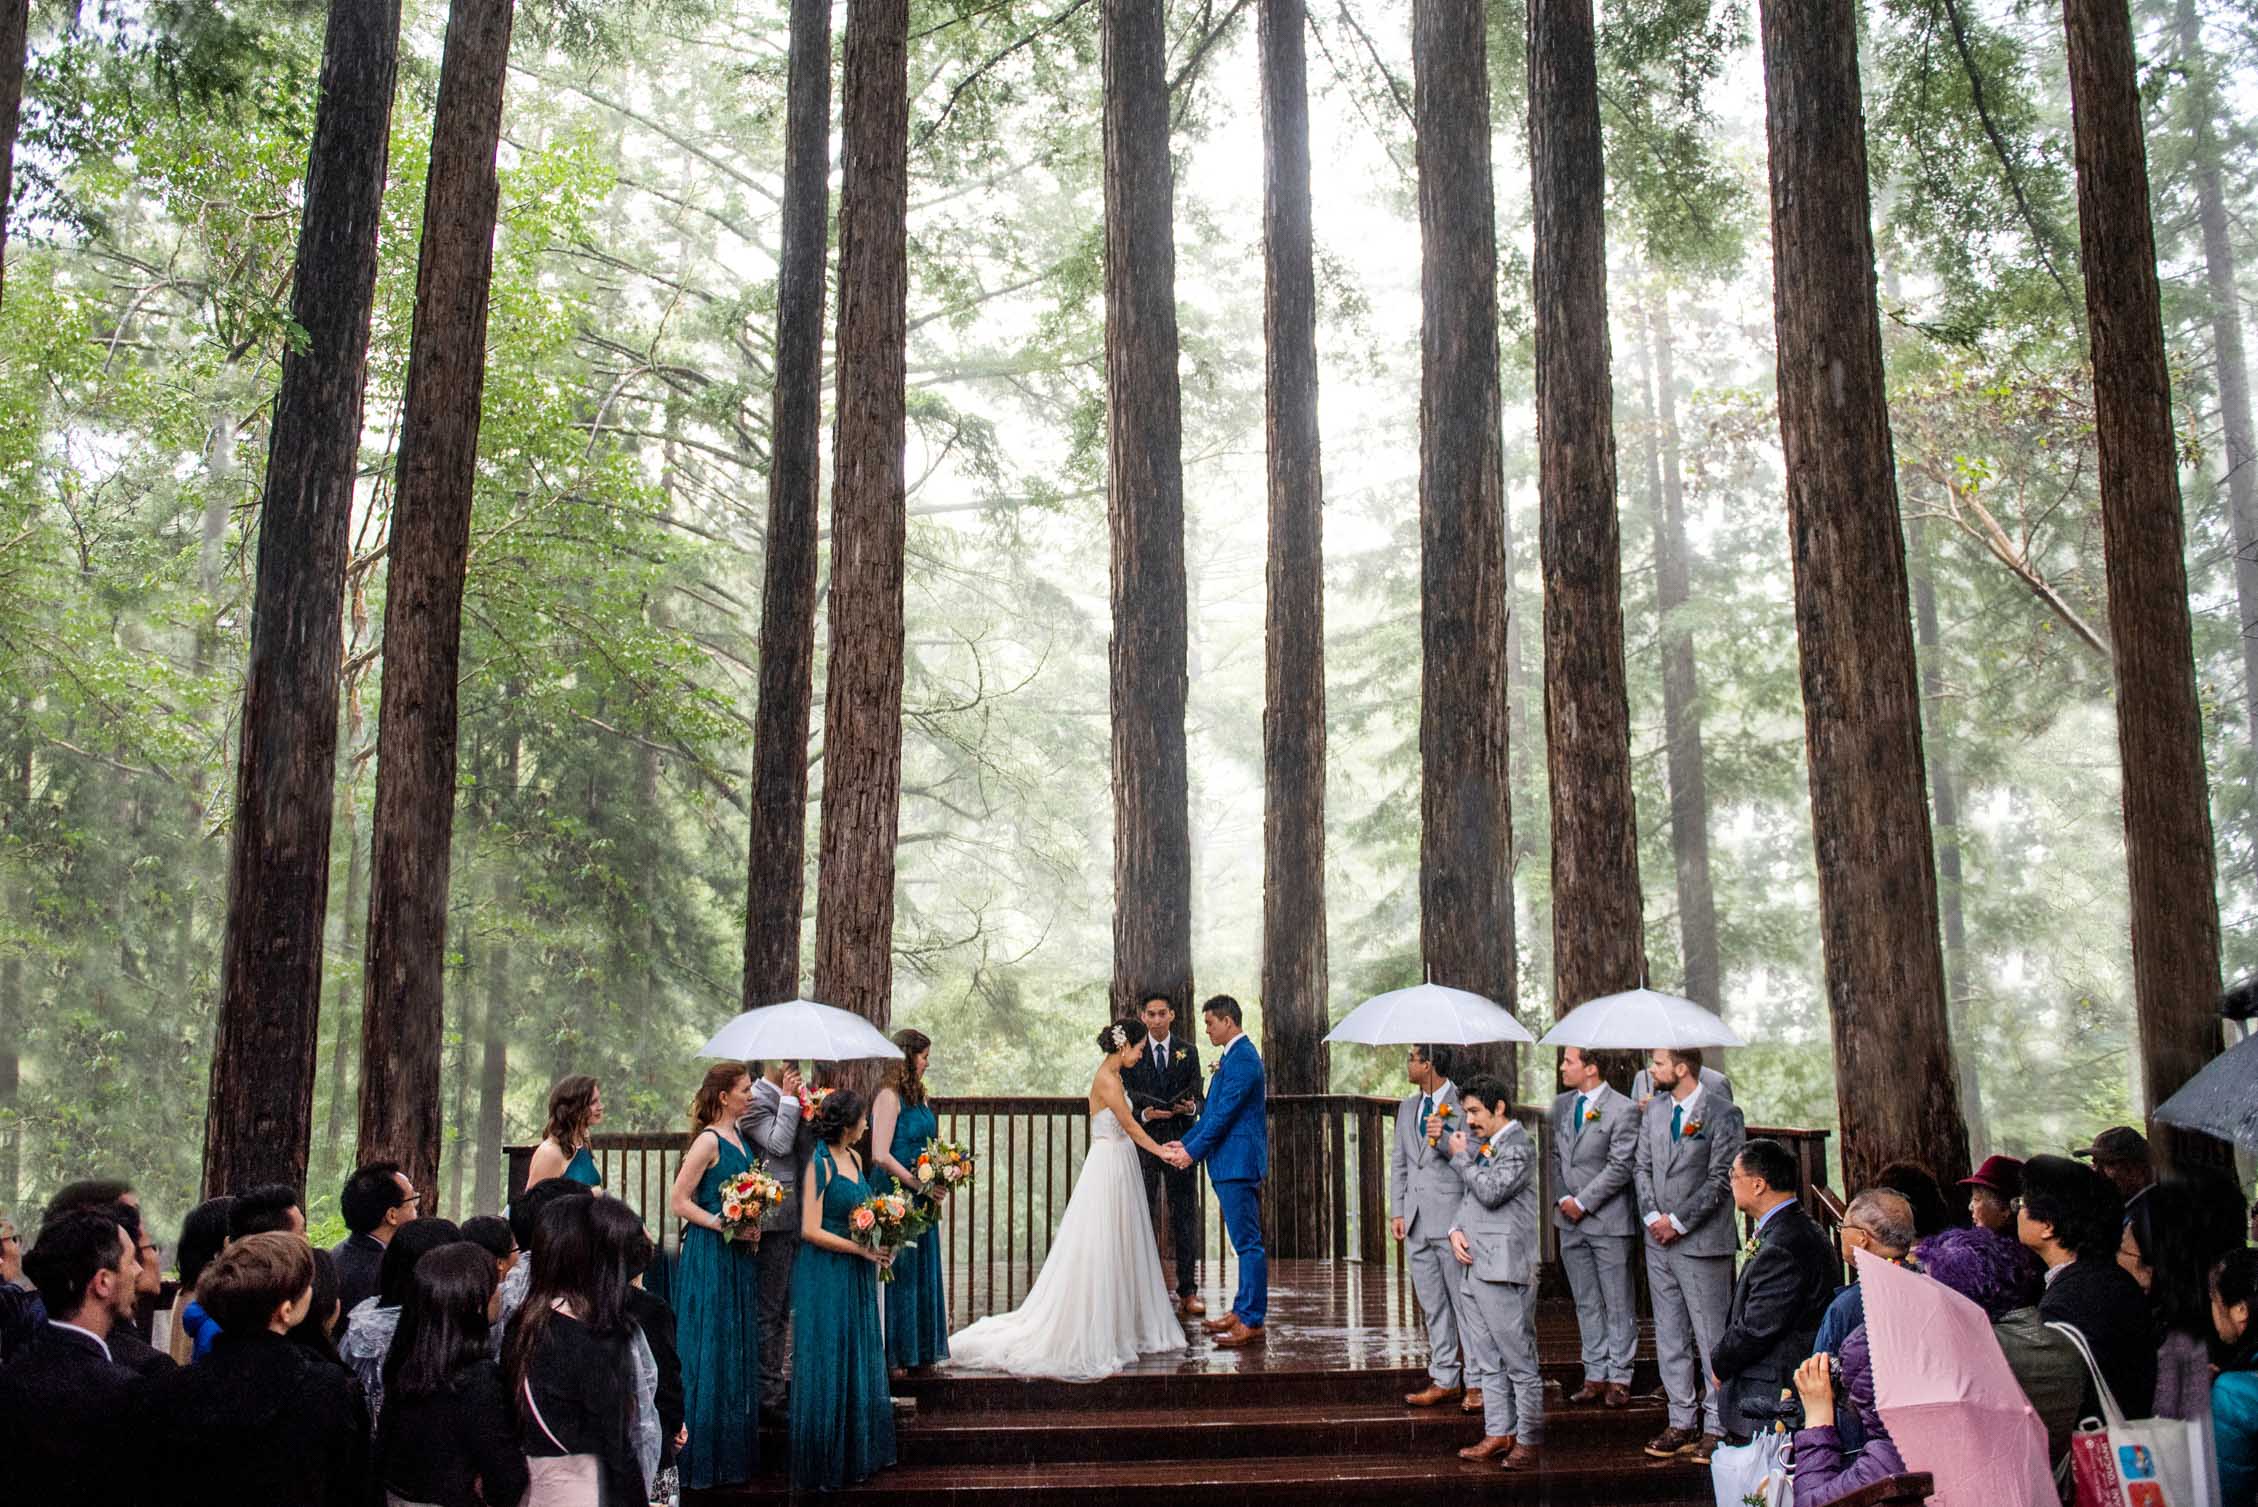 Bride and groom wedding ceremony surrounded by giant redwoods forest